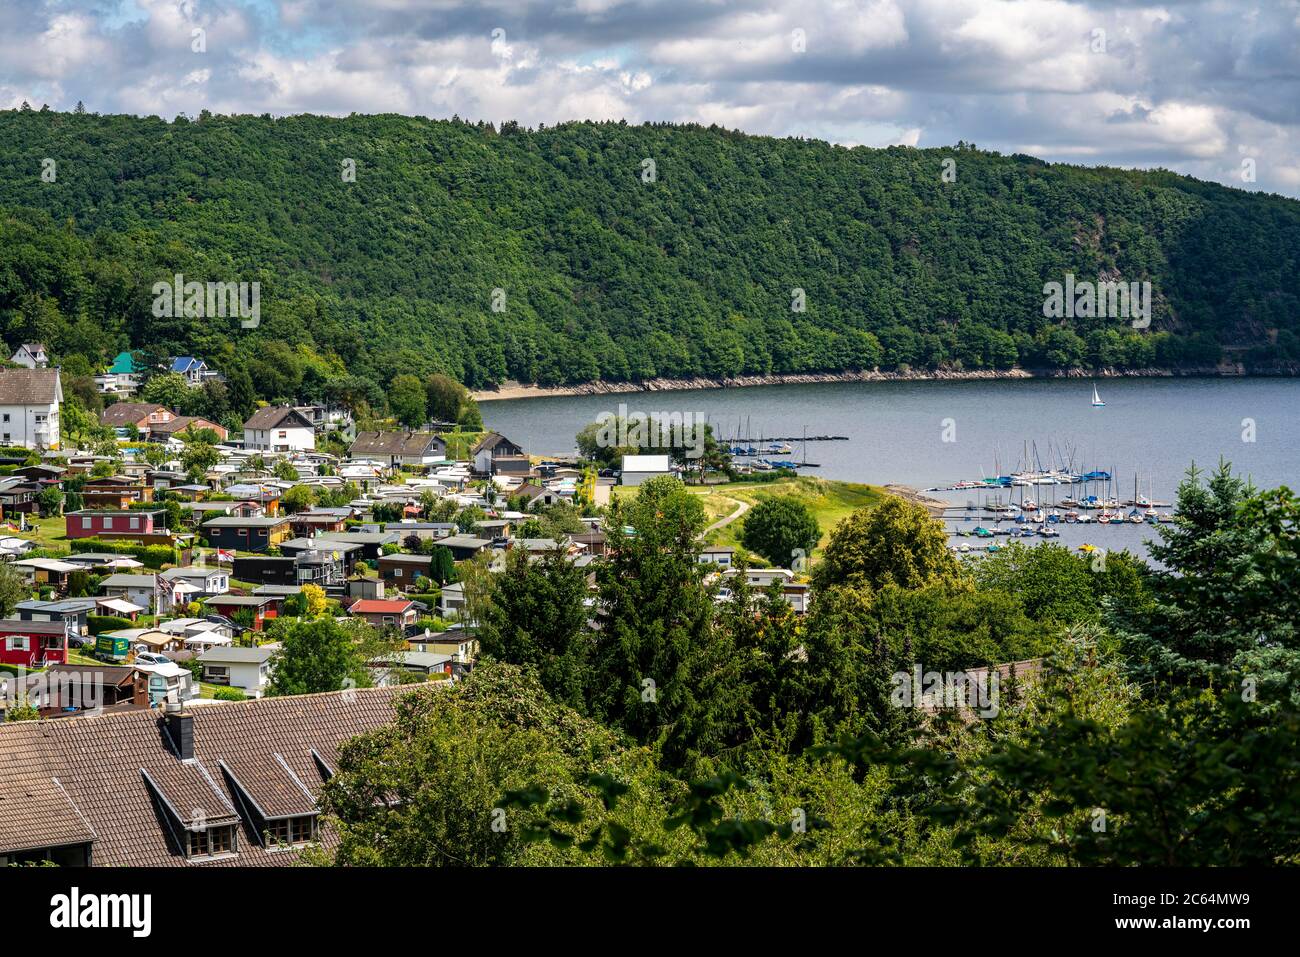 Rursee lake, reservoir, the village Woffelsbach, camping site, permanent  campers, Nationalpark Eifel, NRW, Germany Stock Photo - Alamy